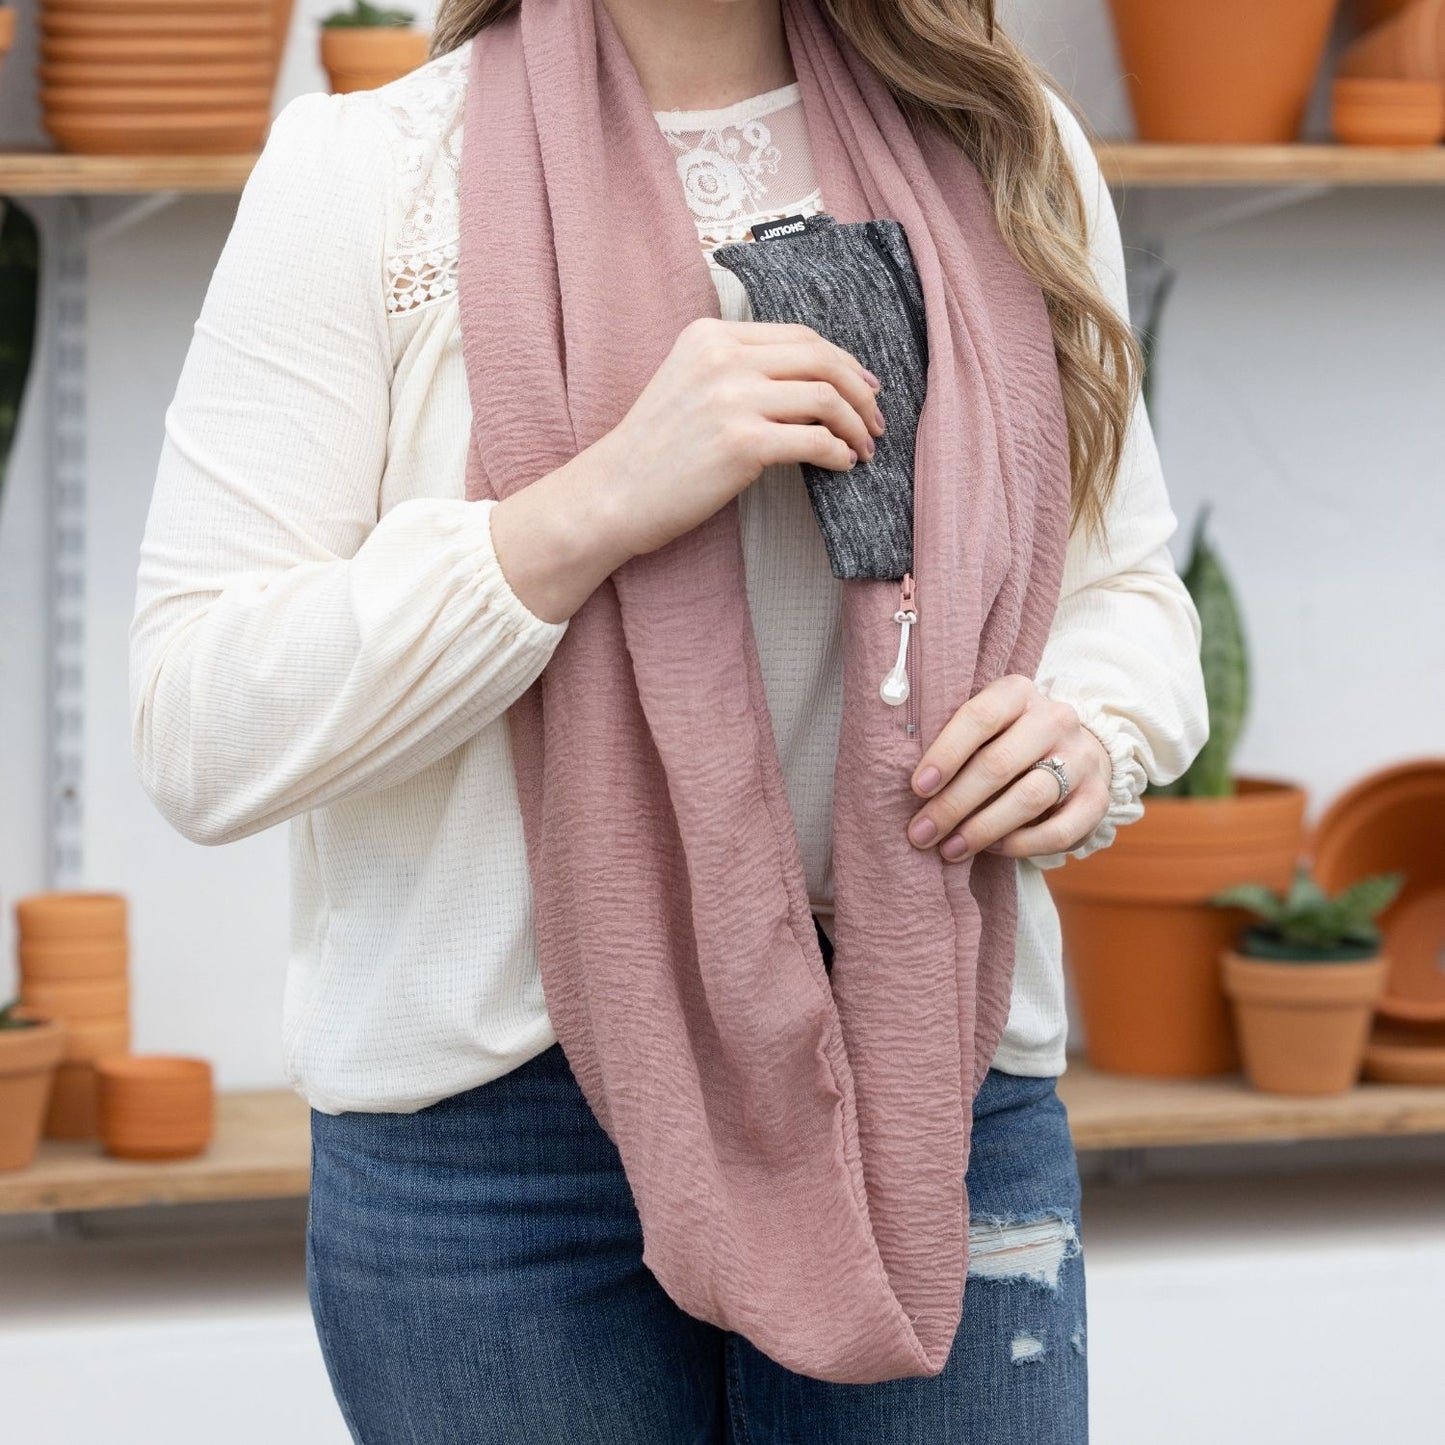 SHOLDIT Convertible Infinity Scarf with Pocket Peaceful Pink shown long